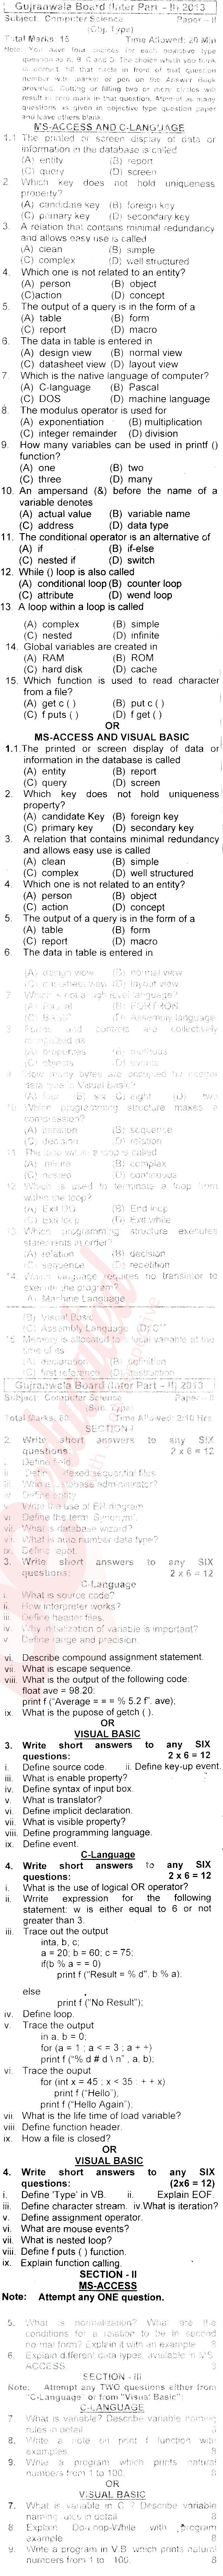 Computer Science ICS Part 2 Past Paper Group 1 BISE Gujranwala 2013